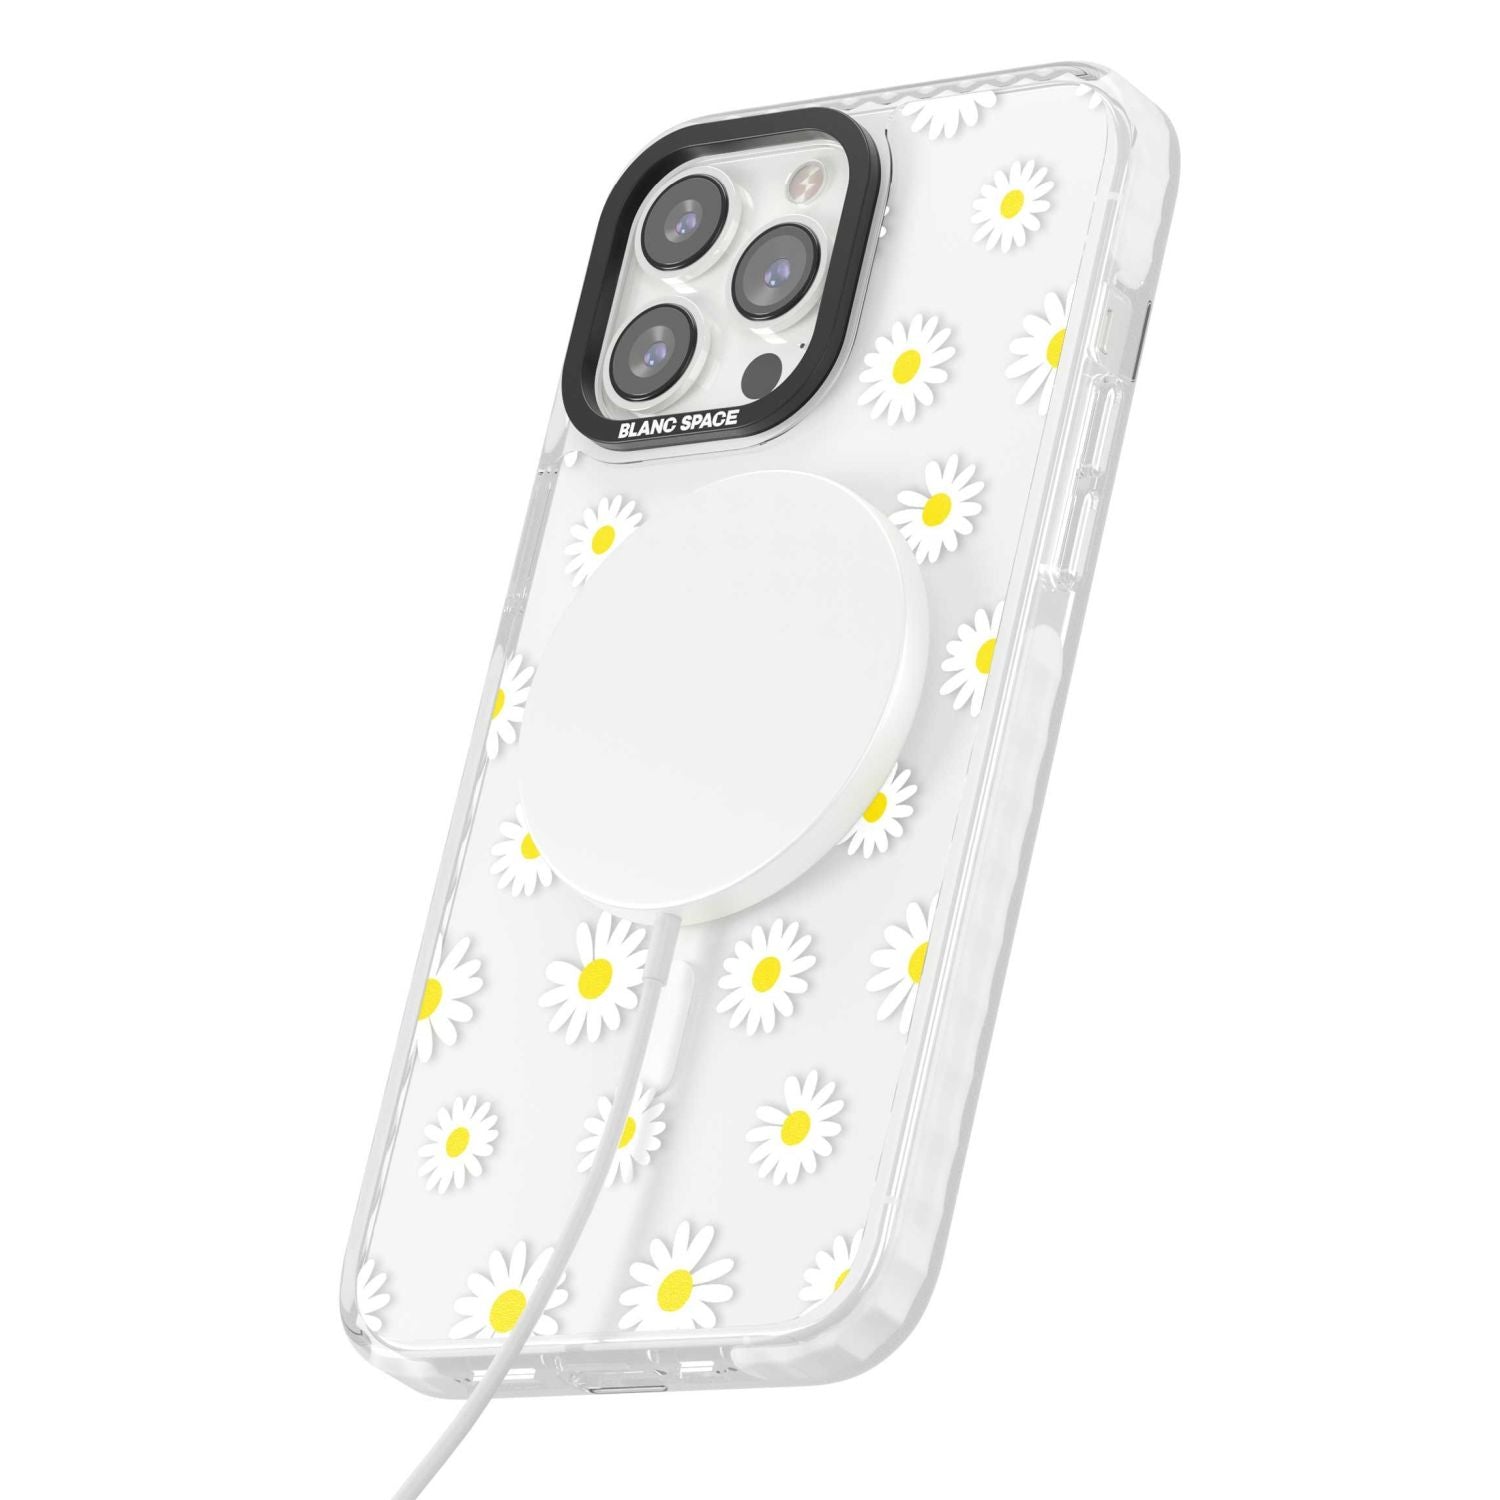 White Daisy Pattern (Clear)